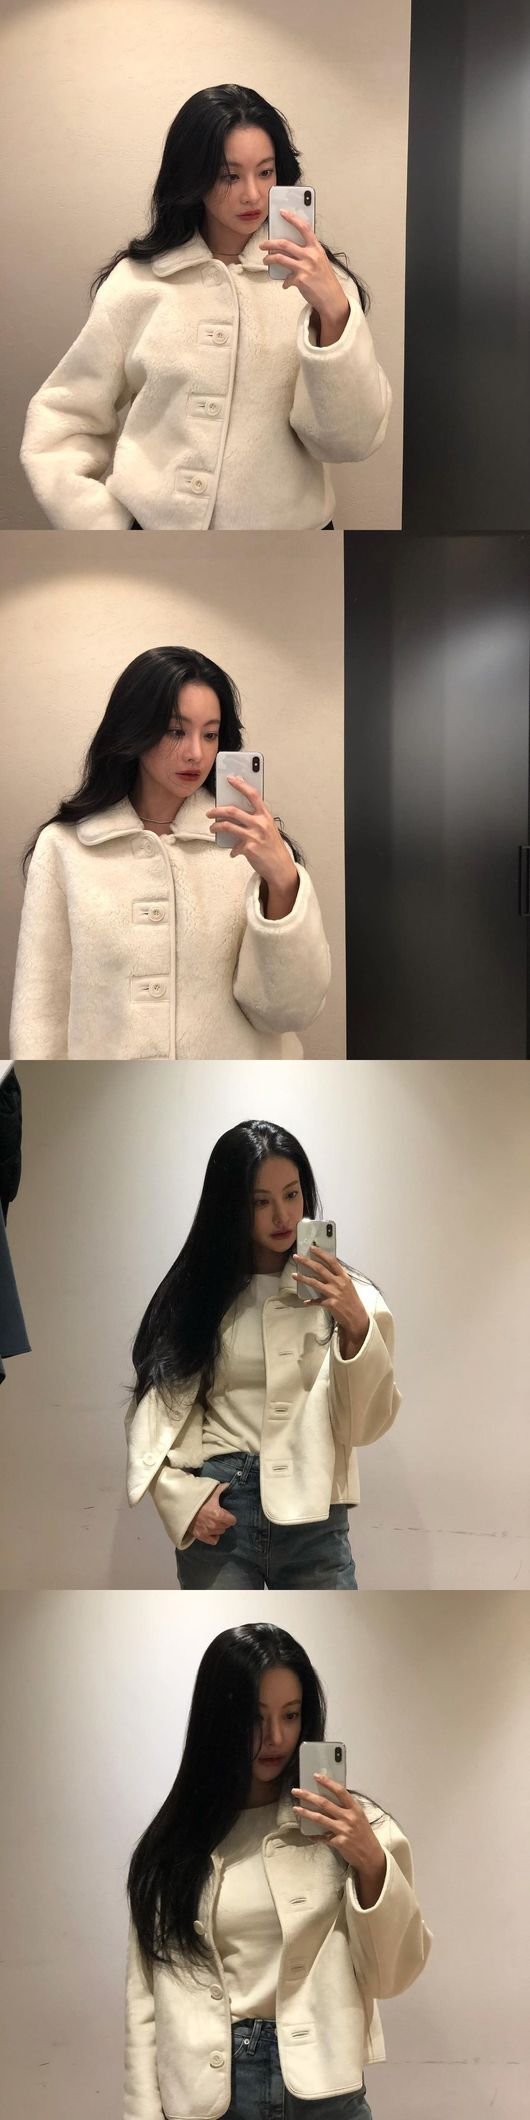 Oh Yeon-seo flaunts beautyOn the afternoon of the 12th, actor Oh Yeon-seo released several photos without any comment on his instagram.The photo shows Oh Yeon-seo taking a selfie in front of the mirror. Oh Yeon-seo, who owns a distinctive feature, poses with long hair hanging down.Especially, the visuals of Oh Yeon-seo like dolls catch the attention of the fans.On the other hand, Oh Yeon-seo confirmed the appearance of KBS 2TV new drama Beautiful Party.Minnam Party is a former profiler and a comic investigative drama about the current ovation shaman.Seo In-guk and Oh Yeon-seo will show off the ovation shaman Nam Han Jun and Detectives in Trouble Detective Han Jae hee respectively.Oh Yeon-seo Instagram